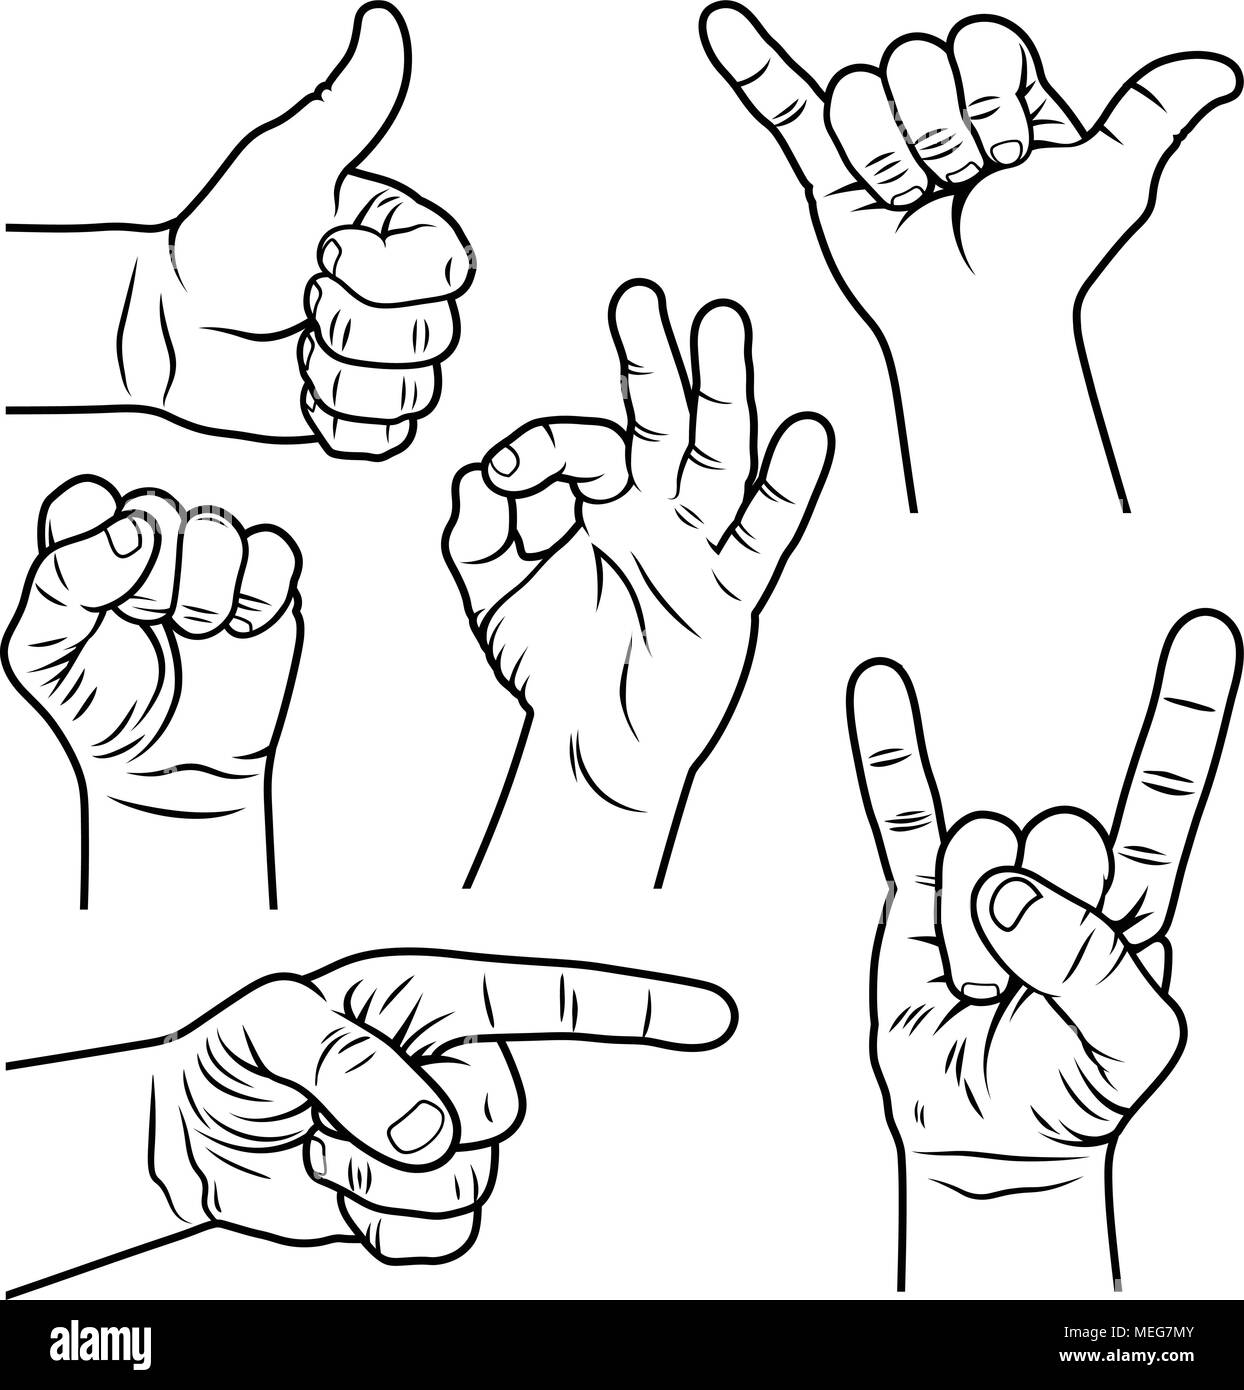 Hand gestures and signs. Hand drawn vector illustration Stock Vector